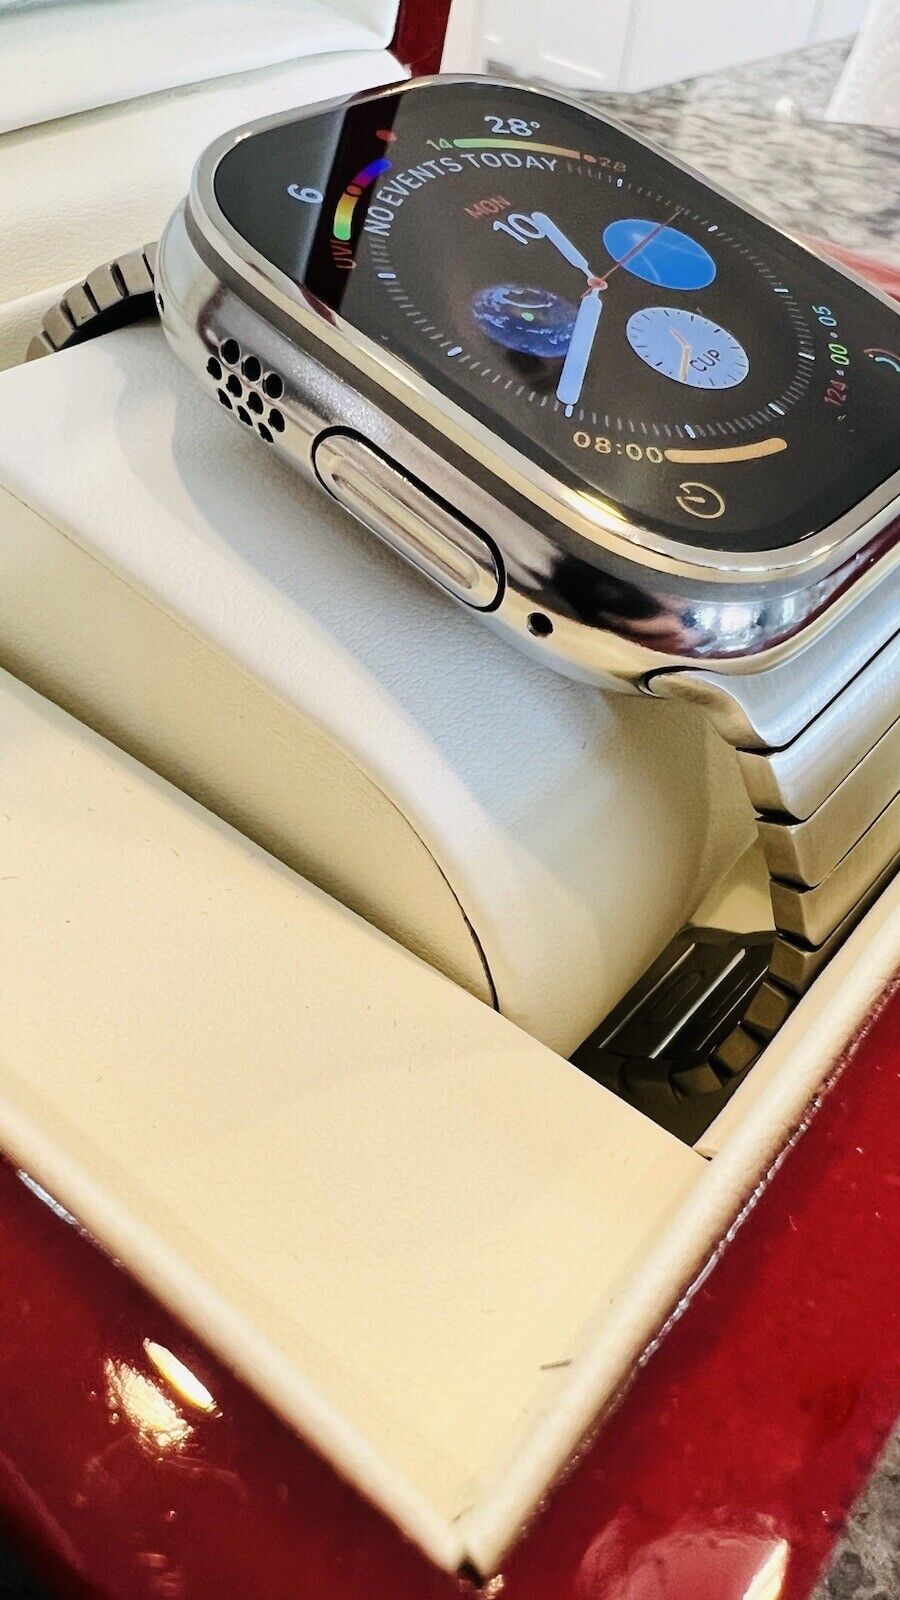 Check Out This Diamond Polished Apple Watch Ultra [Images]